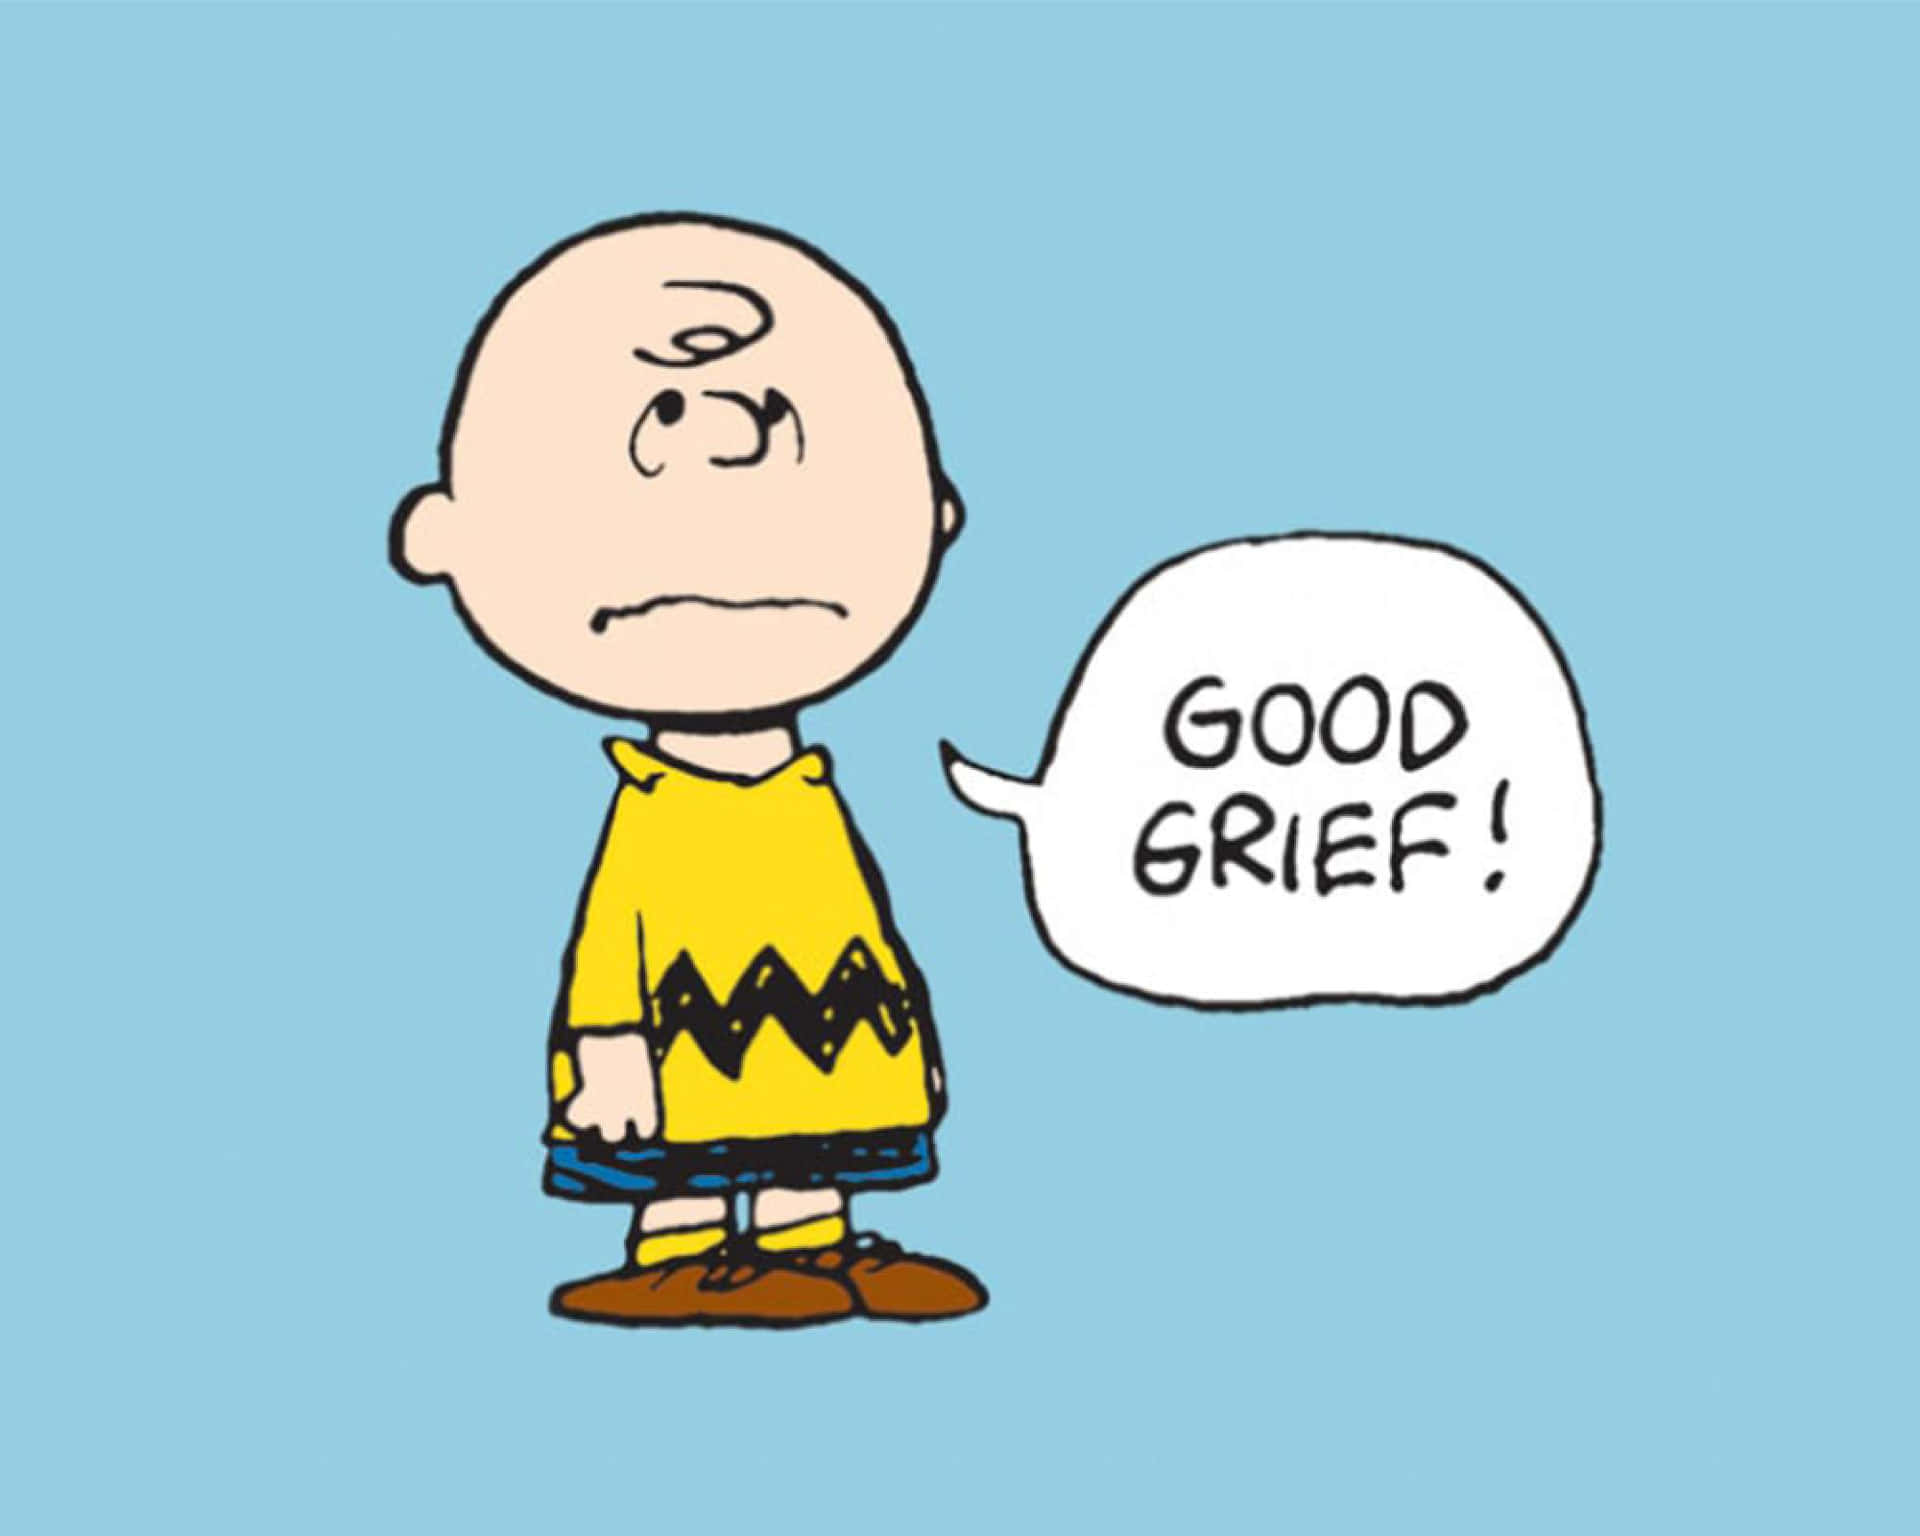 Charlie Brown With A Speech Bubble That Says Good Grief